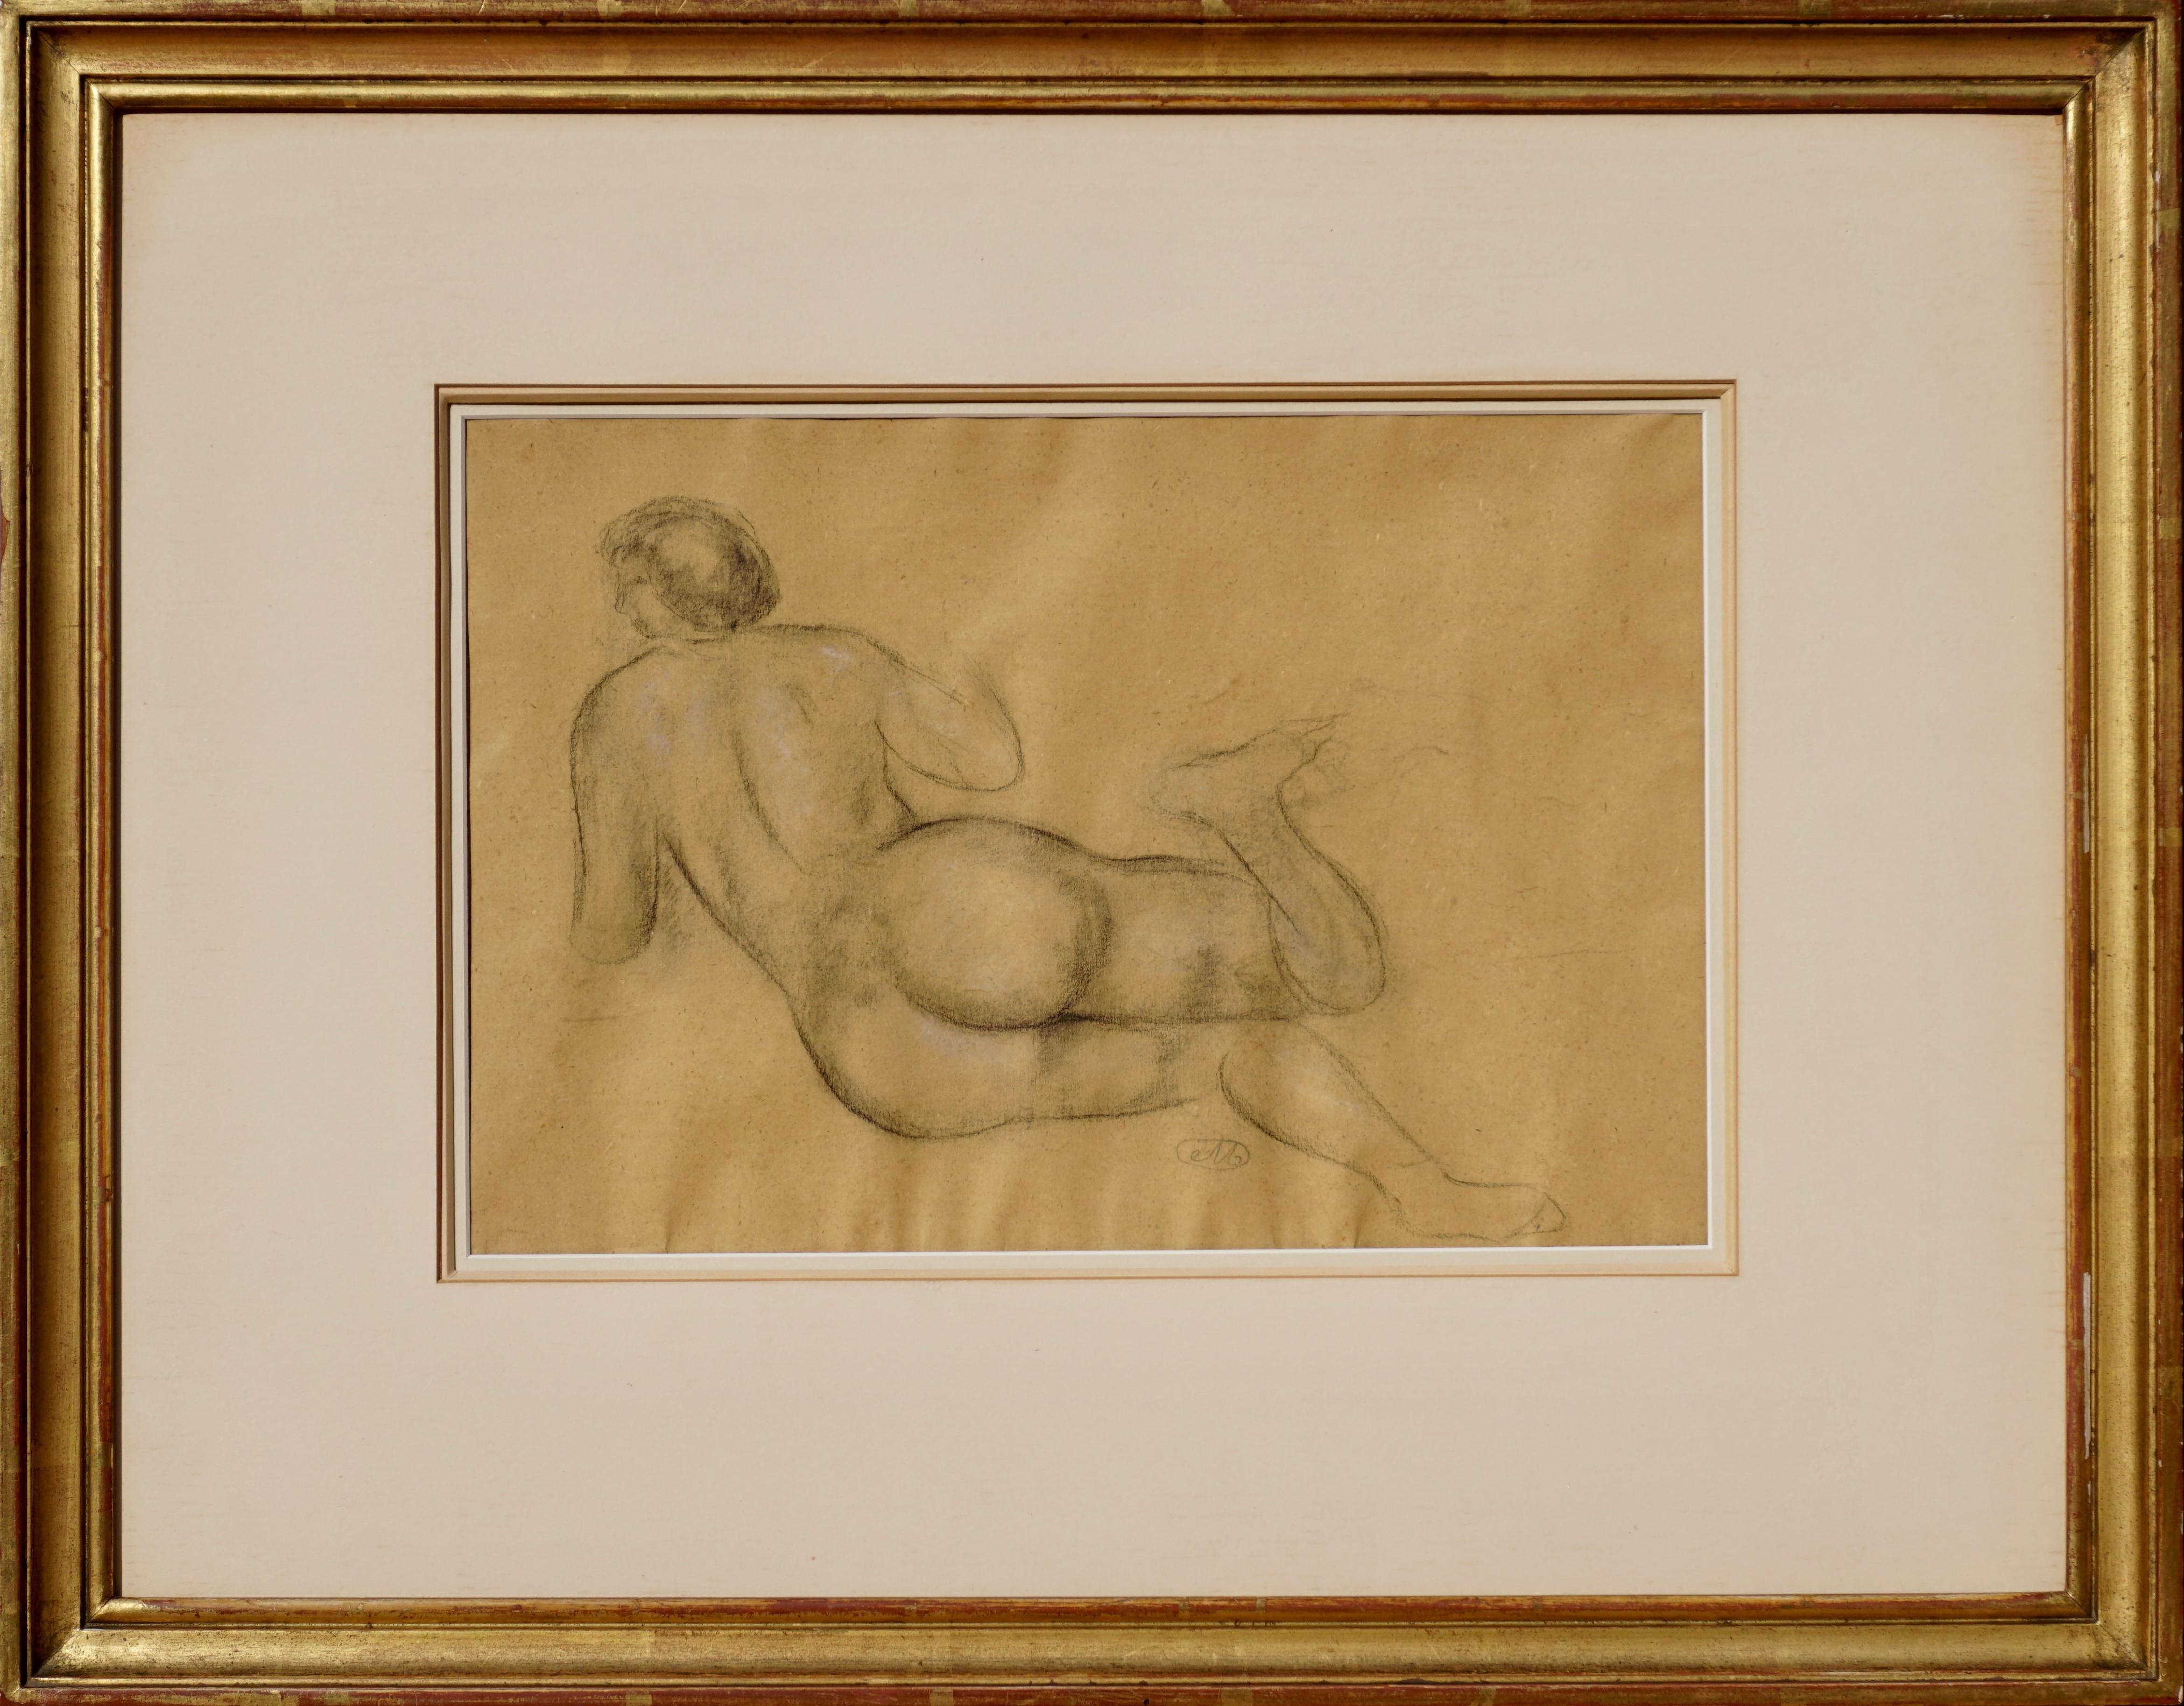 Aristide Maillol (Fr, 1861-1944) 

A very large original charcoal drawing by Aristide Maillol verified by Olivier Lorquin, Director of Galerie Dina Vierny at the Musee Maillol in Paris. A COA will be provided by Mr. Lorquin..

The female figure